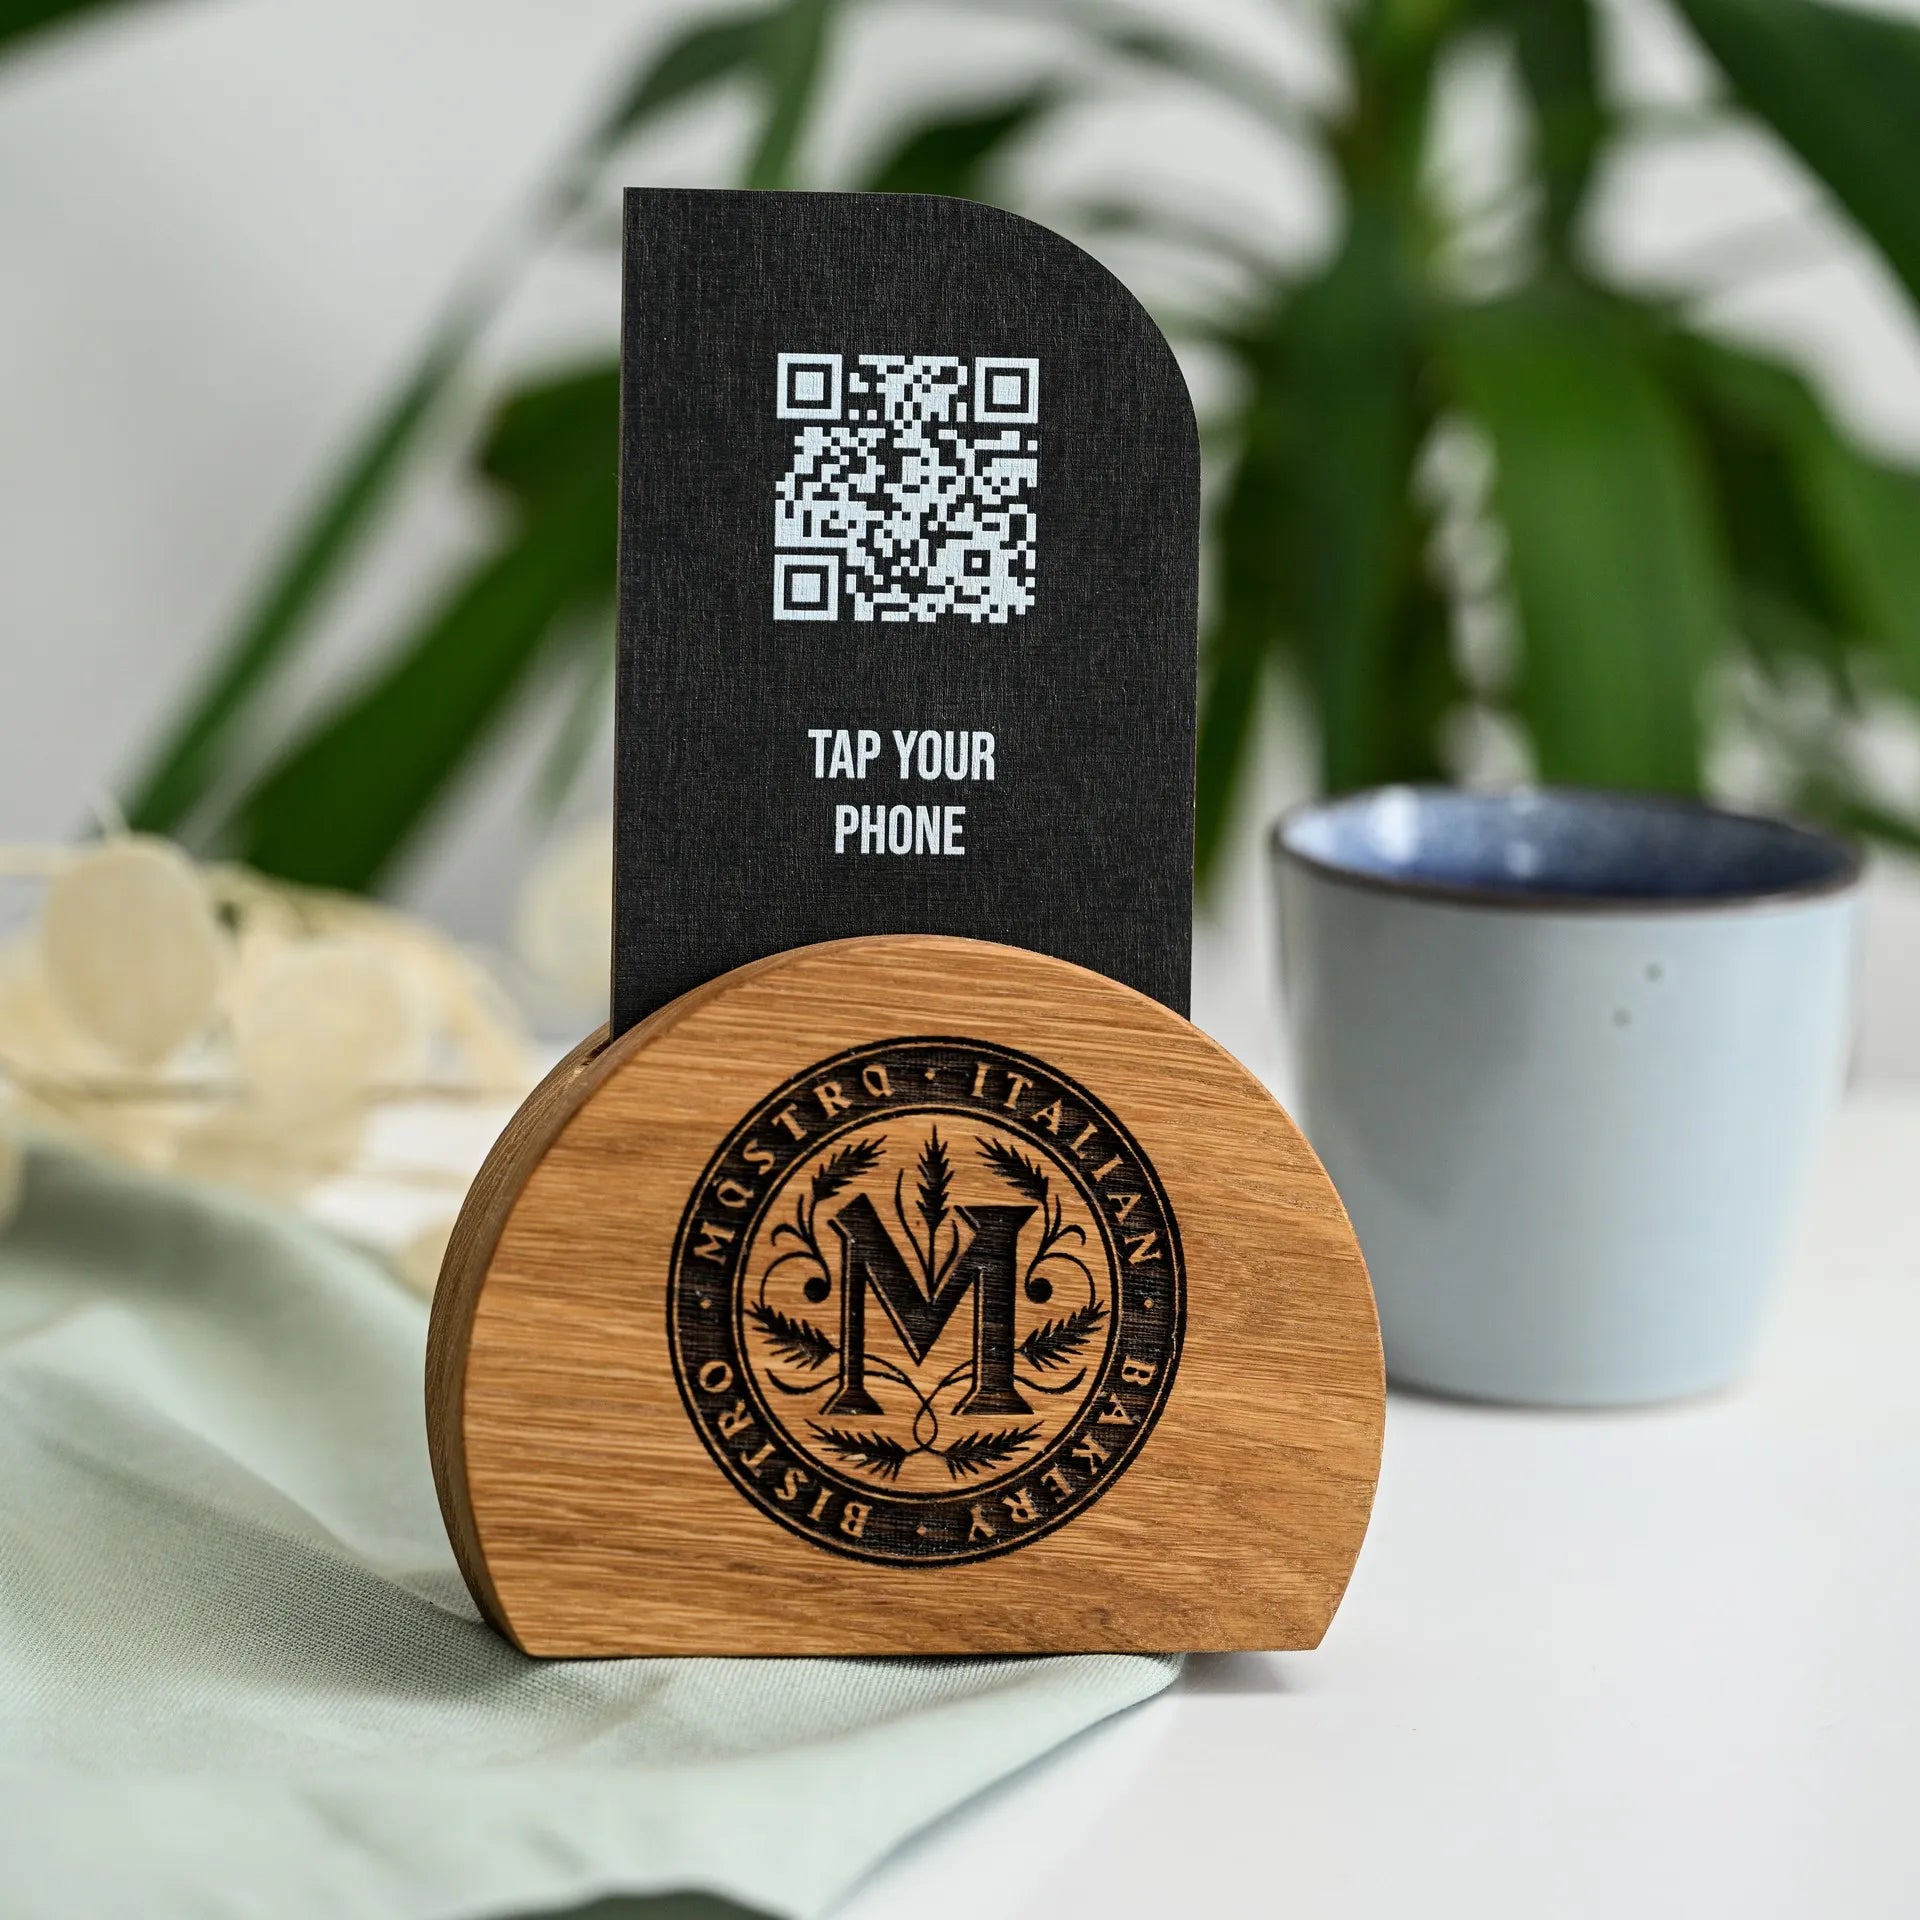 Revolutionize your dining experience with our versatile NFC tag and QR code sign, seamlessly integrated into a sleek wooden stand for easy access.